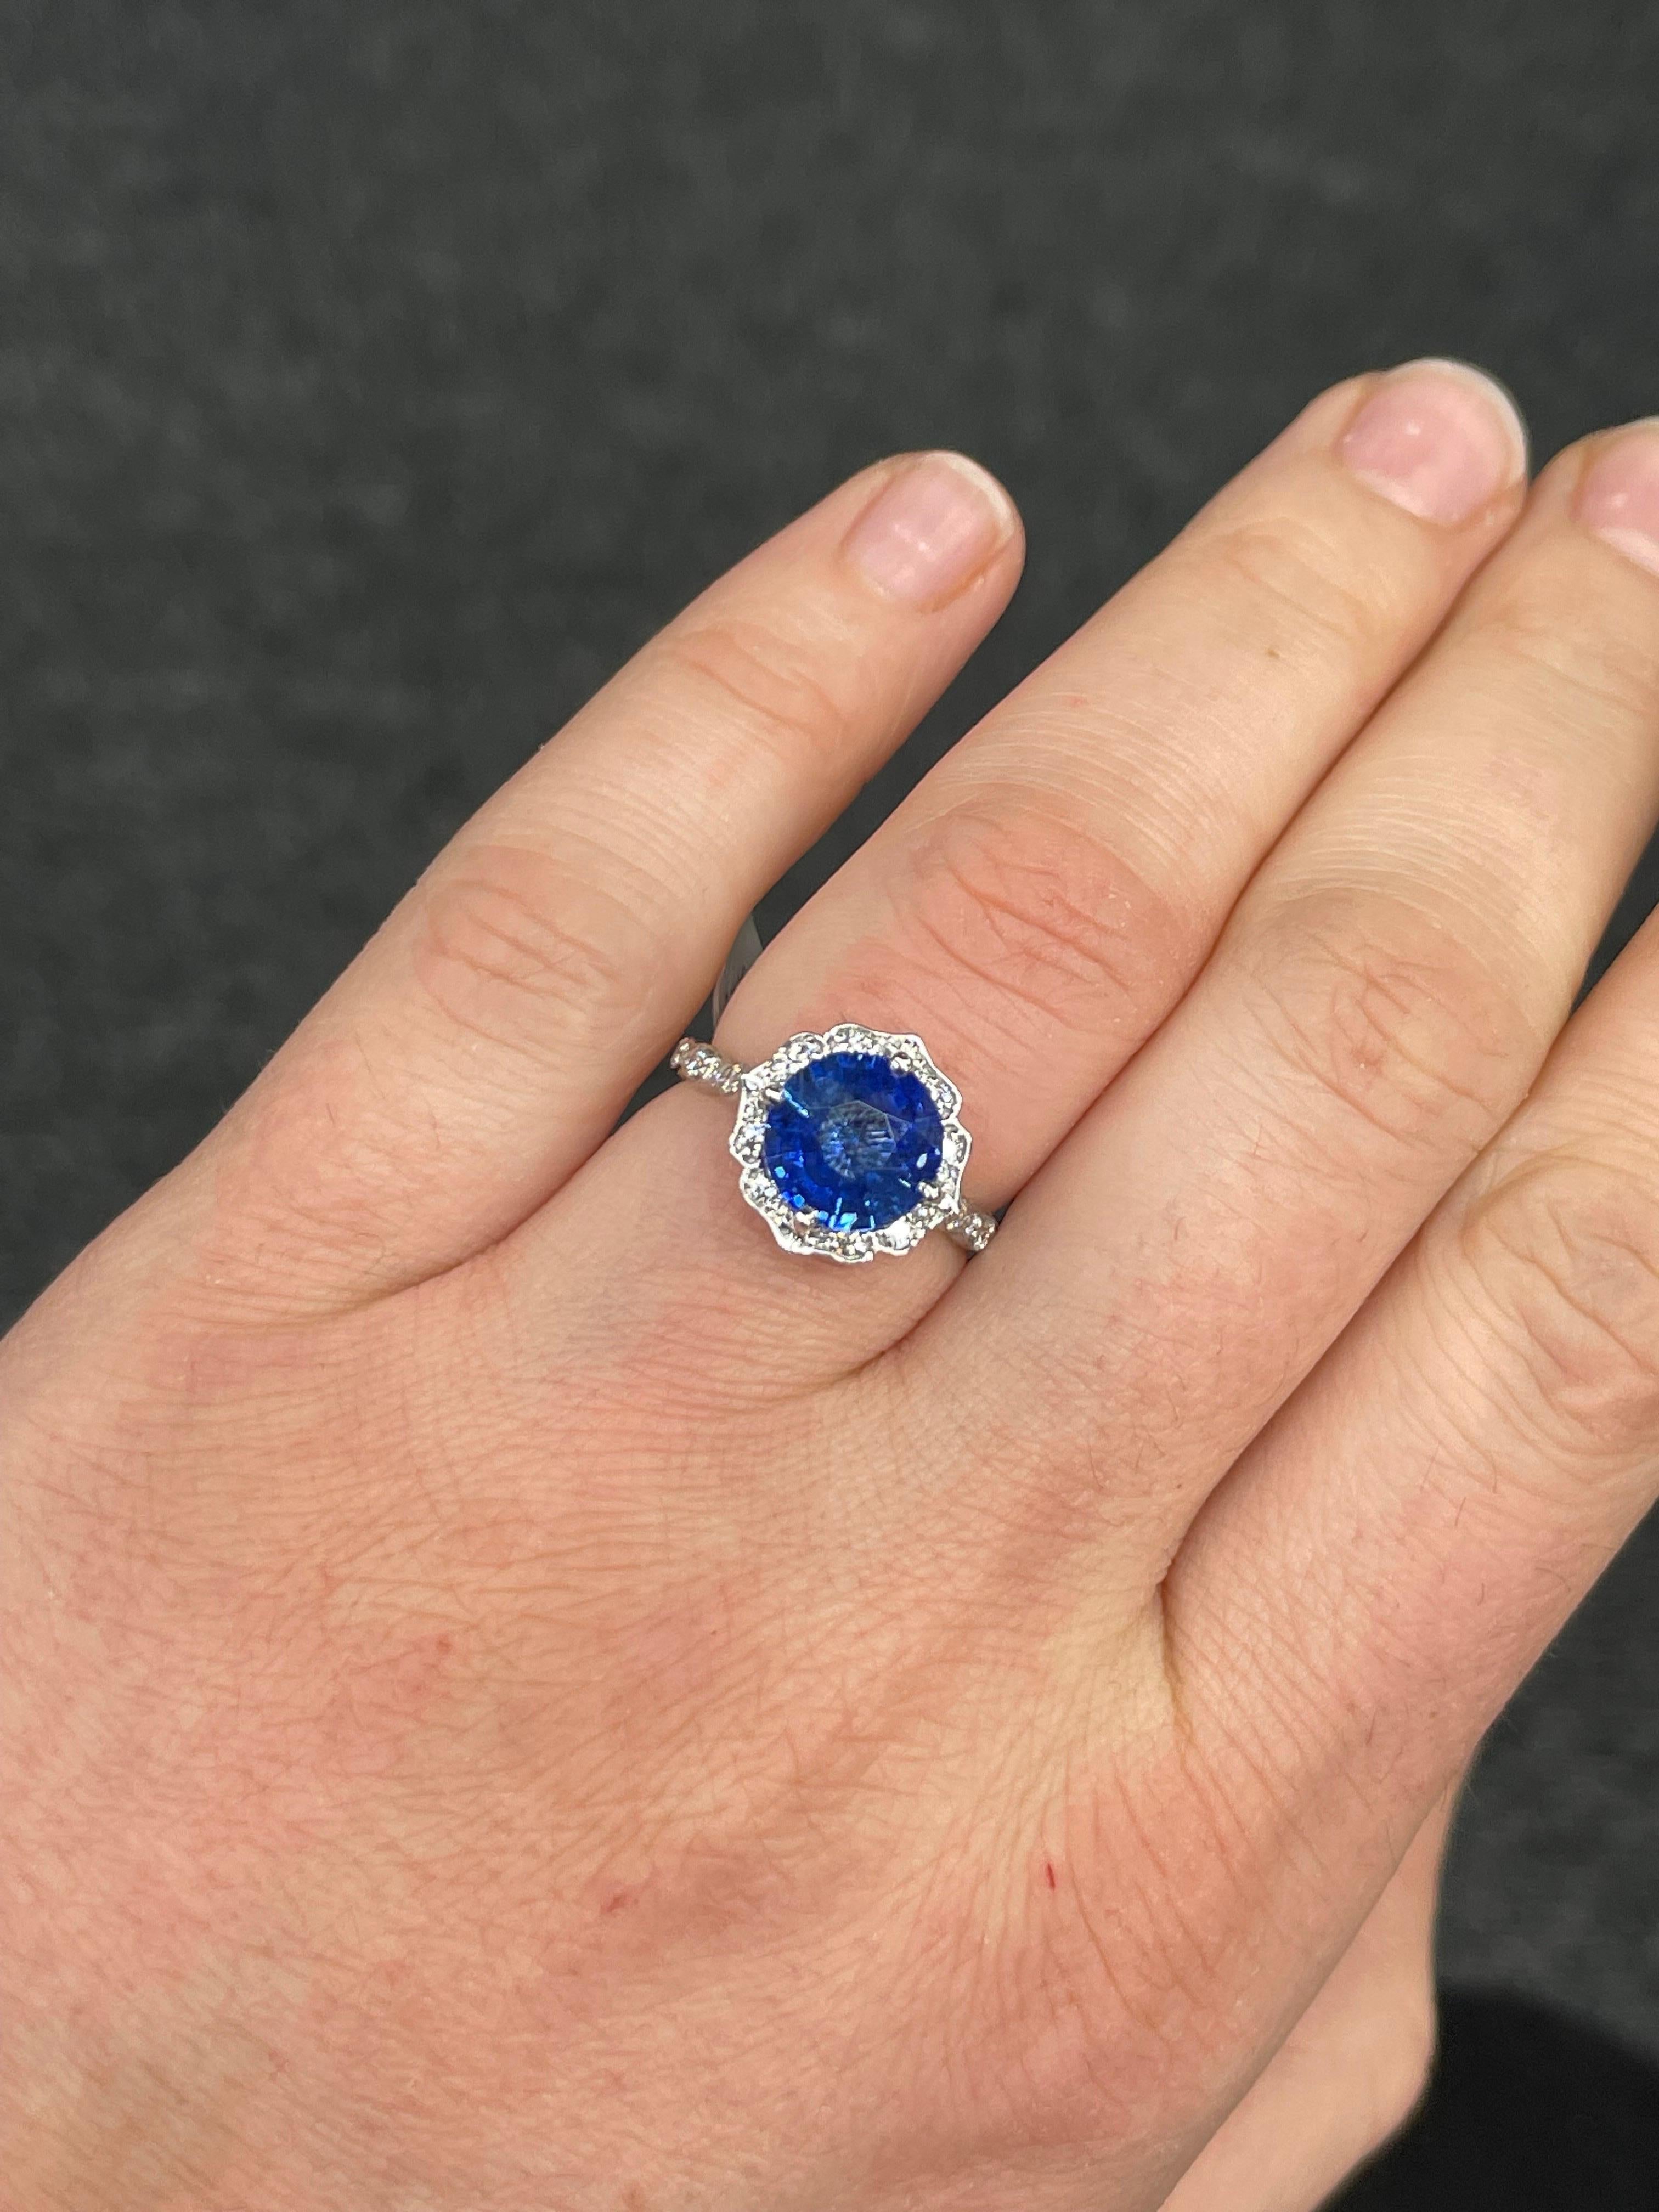 Antique Inspired Sapphire Diamond Halo Ring 4.07 Carats 14 Karat White Gold In New Condition For Sale In New York, NY